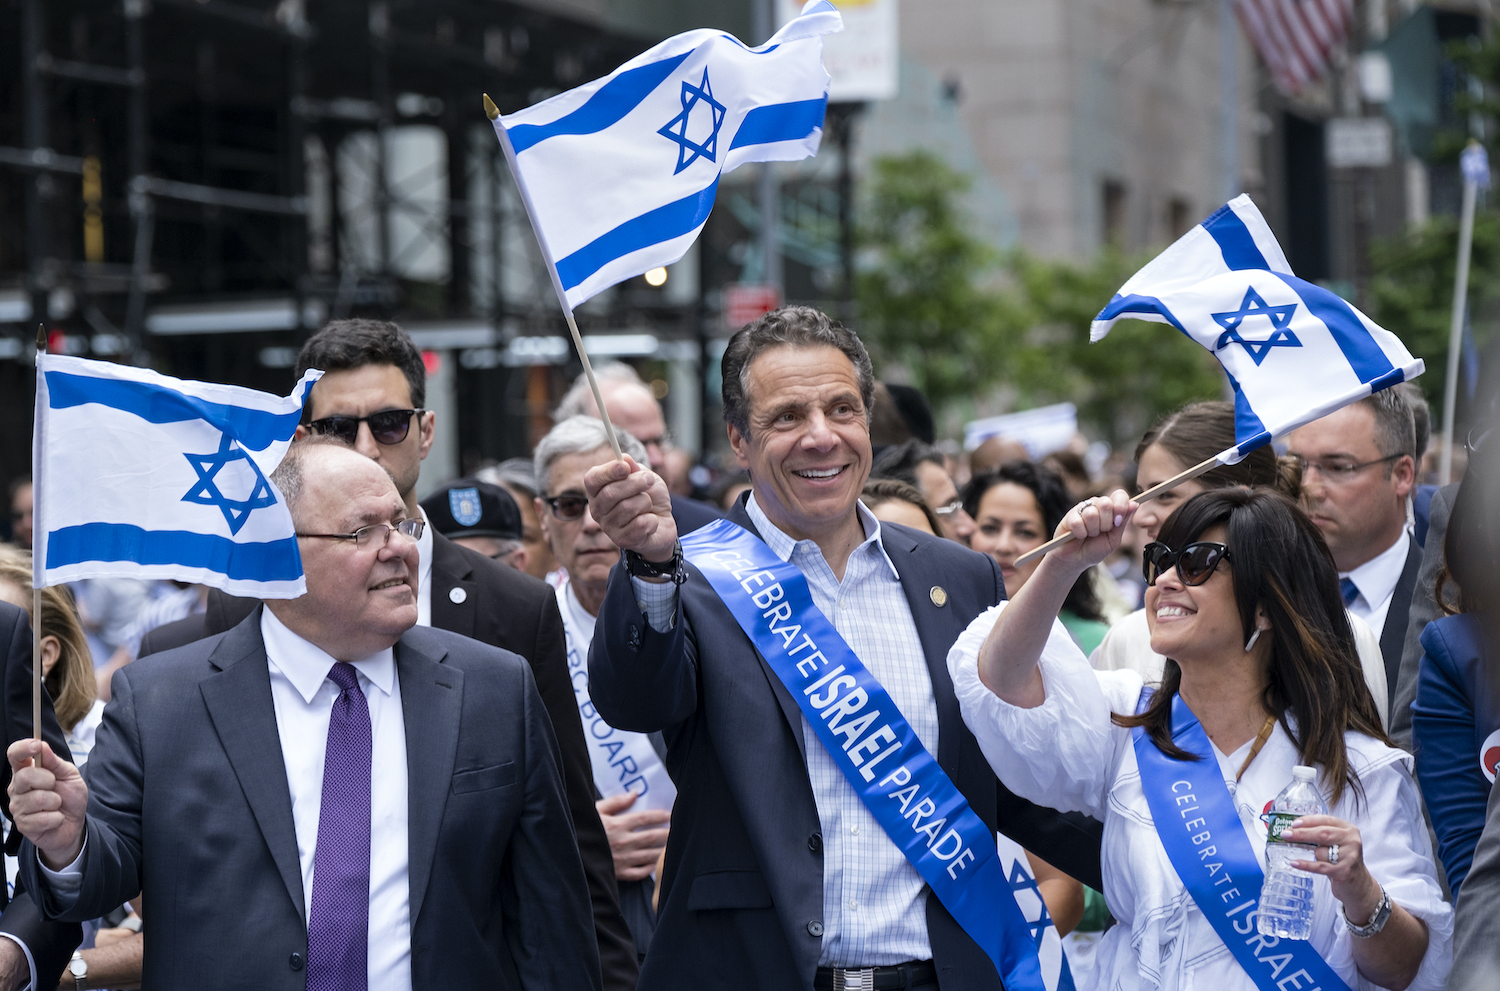 New York Celebrate Israel parade canceled due to virus pandemic The